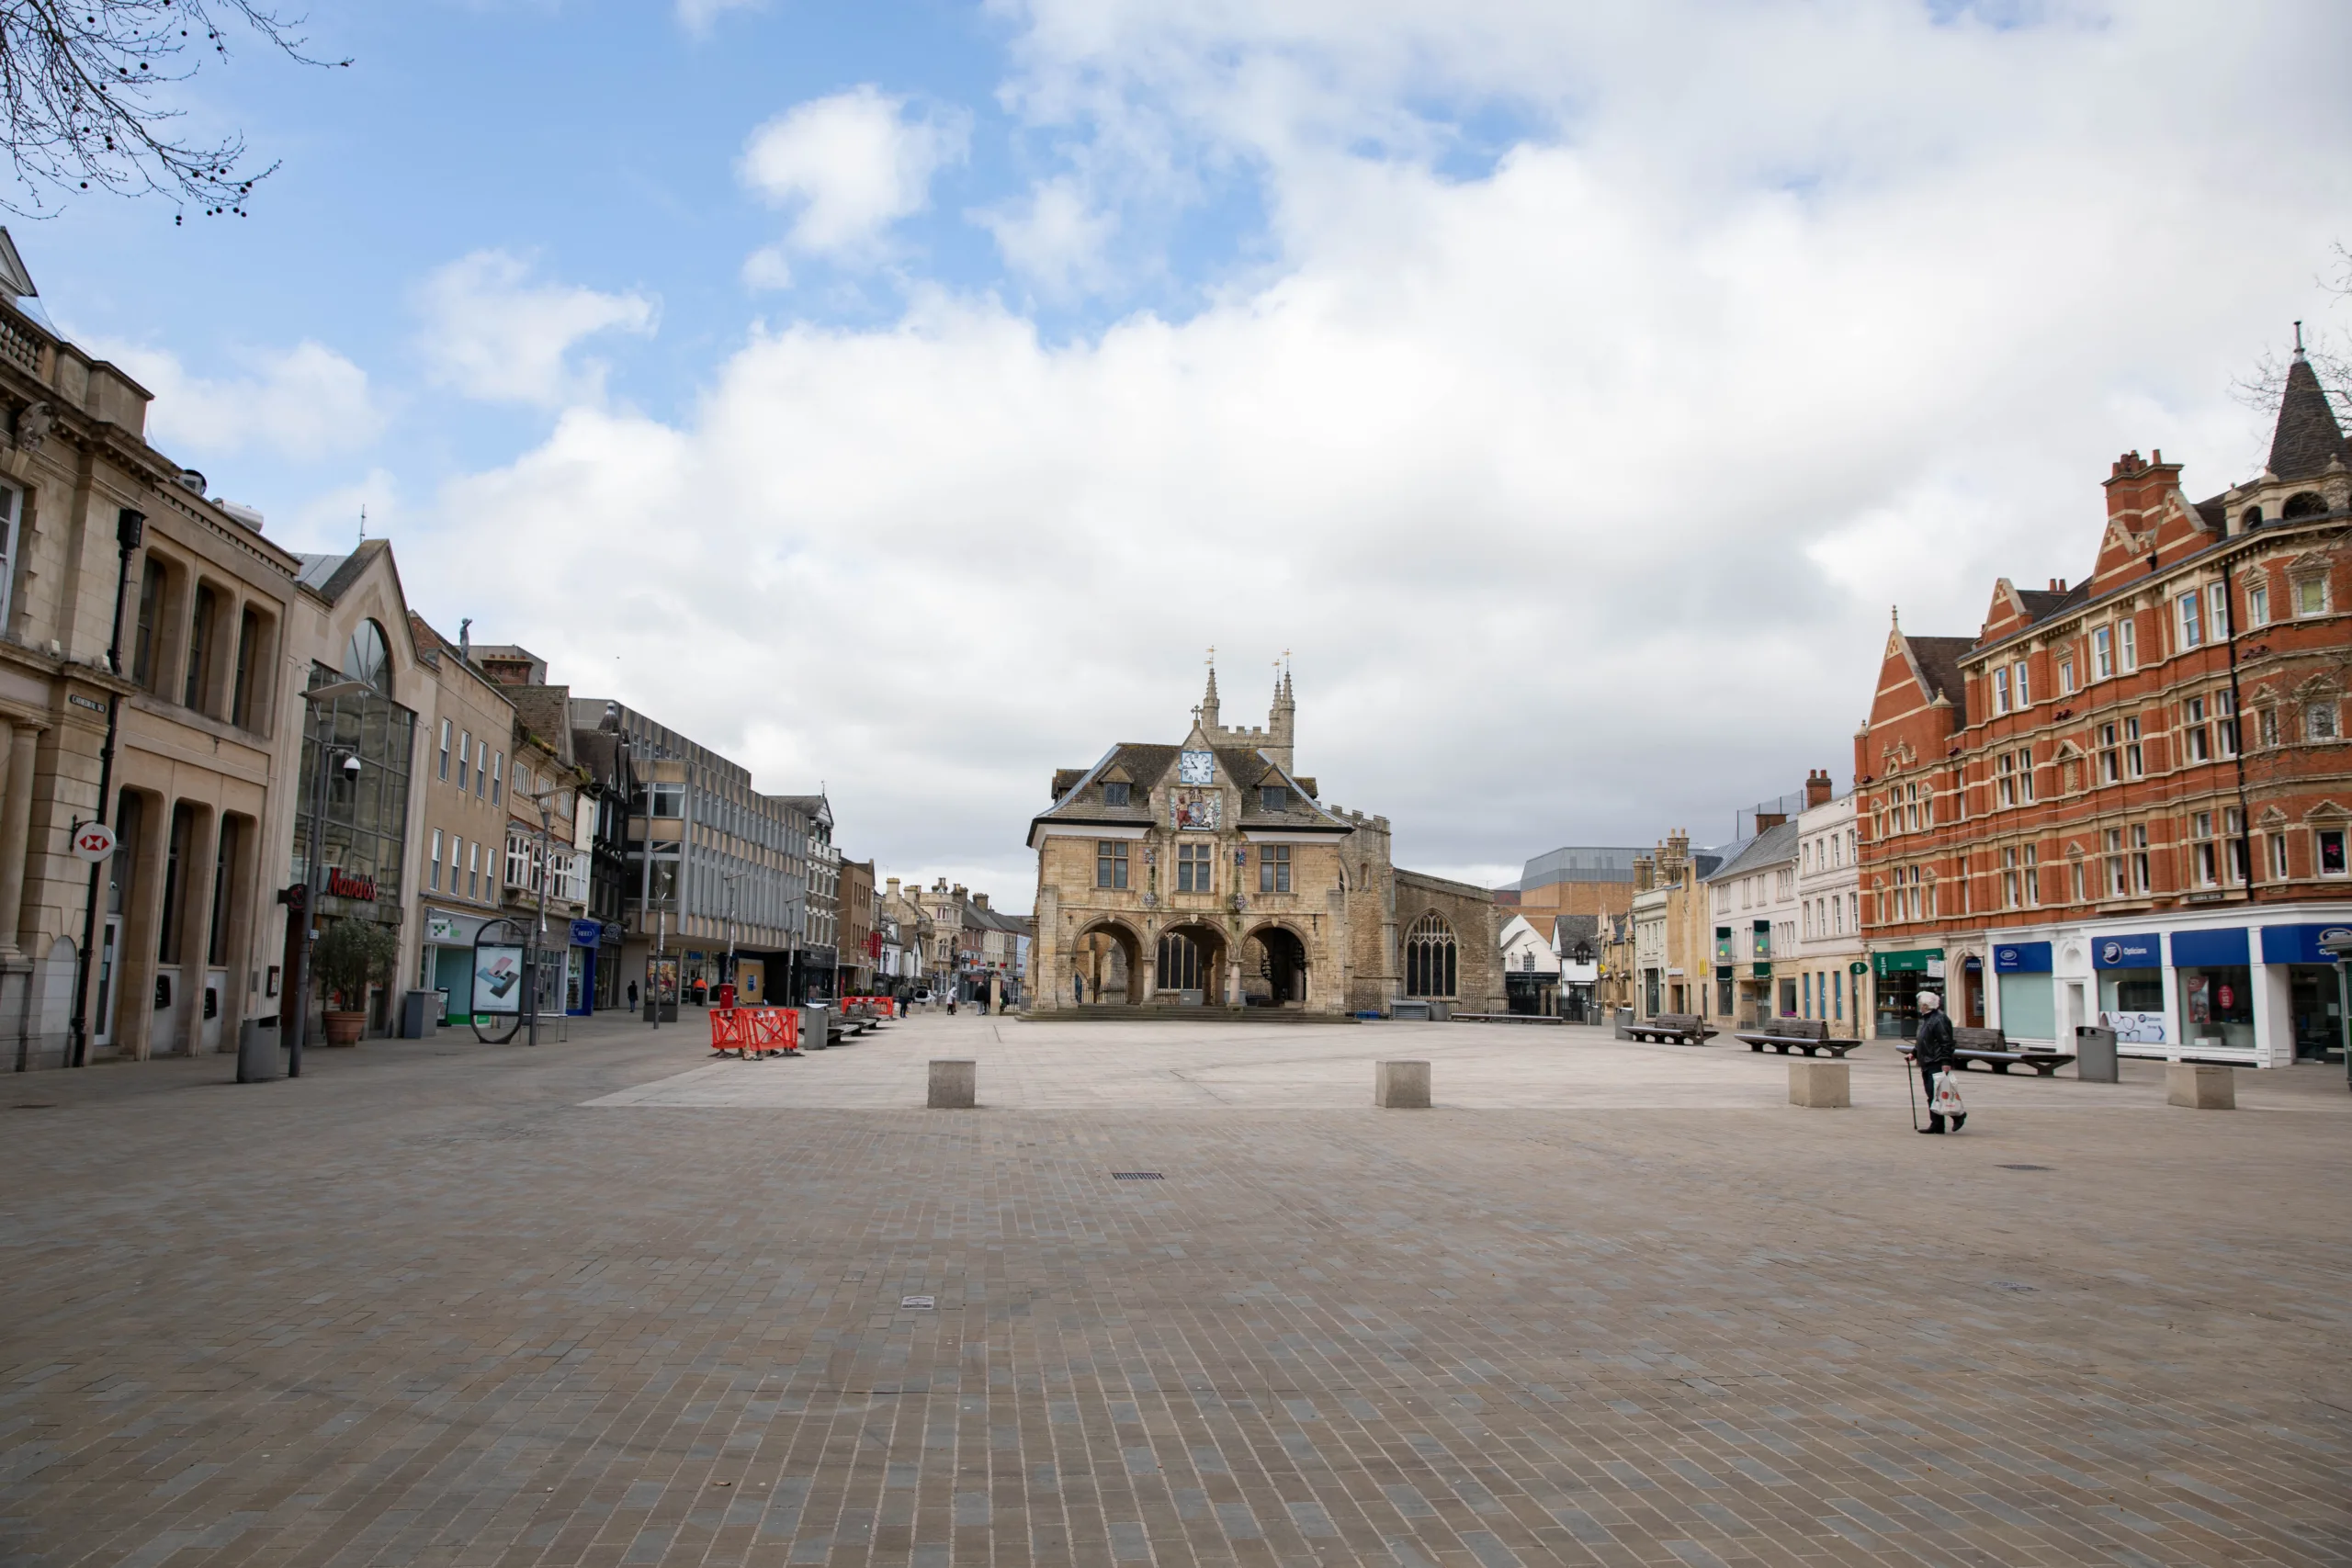 Peterborough City Centre is deserted at 11am on a Saturday during the COVID19 lock-down, City Centre, Peterborough Saturday 28 March 2020. Picture by Terry Harris.